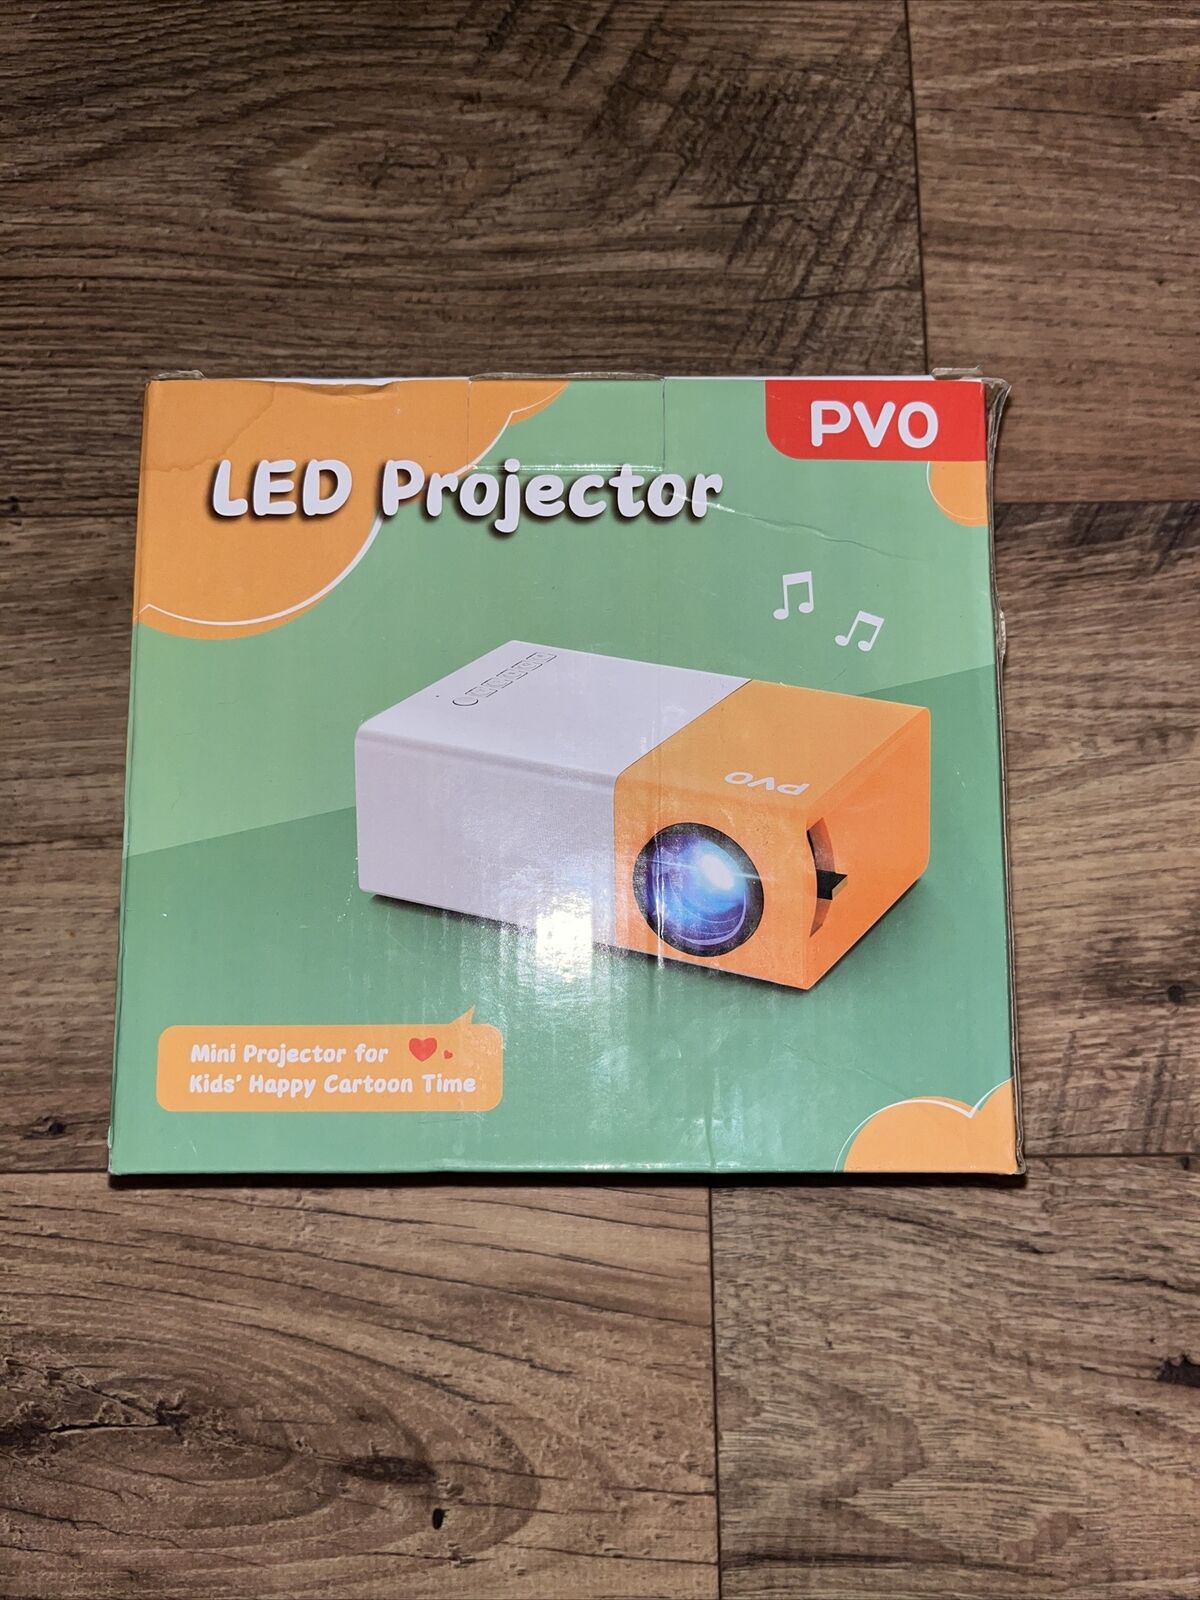 PVO 300 Pro Mini LED Portable Kids Projector for Cartoon,Indoor/Outdoor YG300PRO